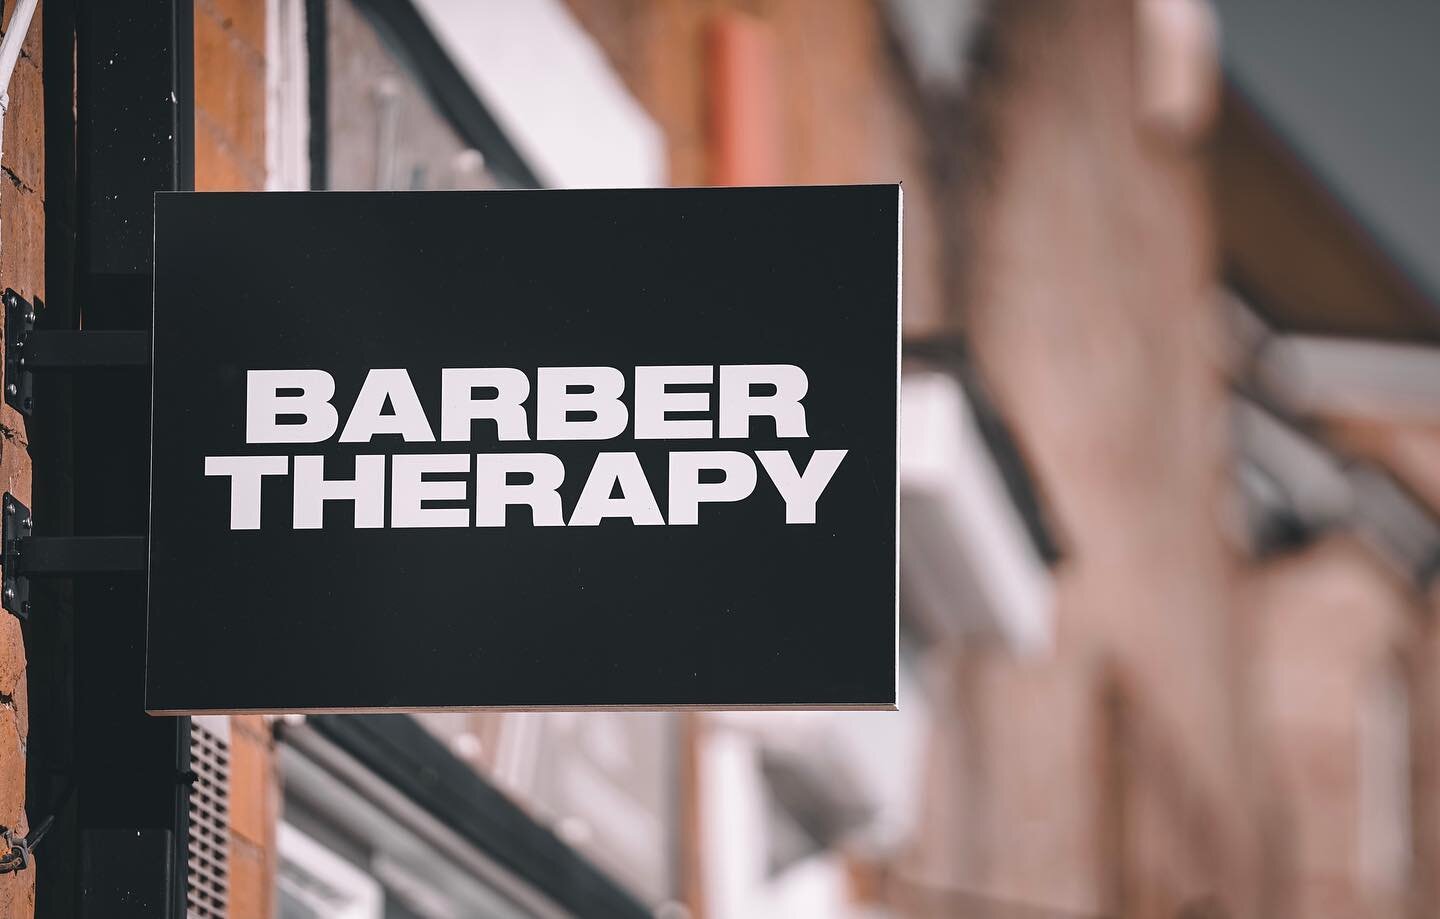 We will be bringing the Barber Therapy Method to even more people around Birmingham and beyond. By adding some of the most talented barbers from the area, we will be able to help everyone who visits us reach their potential through amazing haircuts a